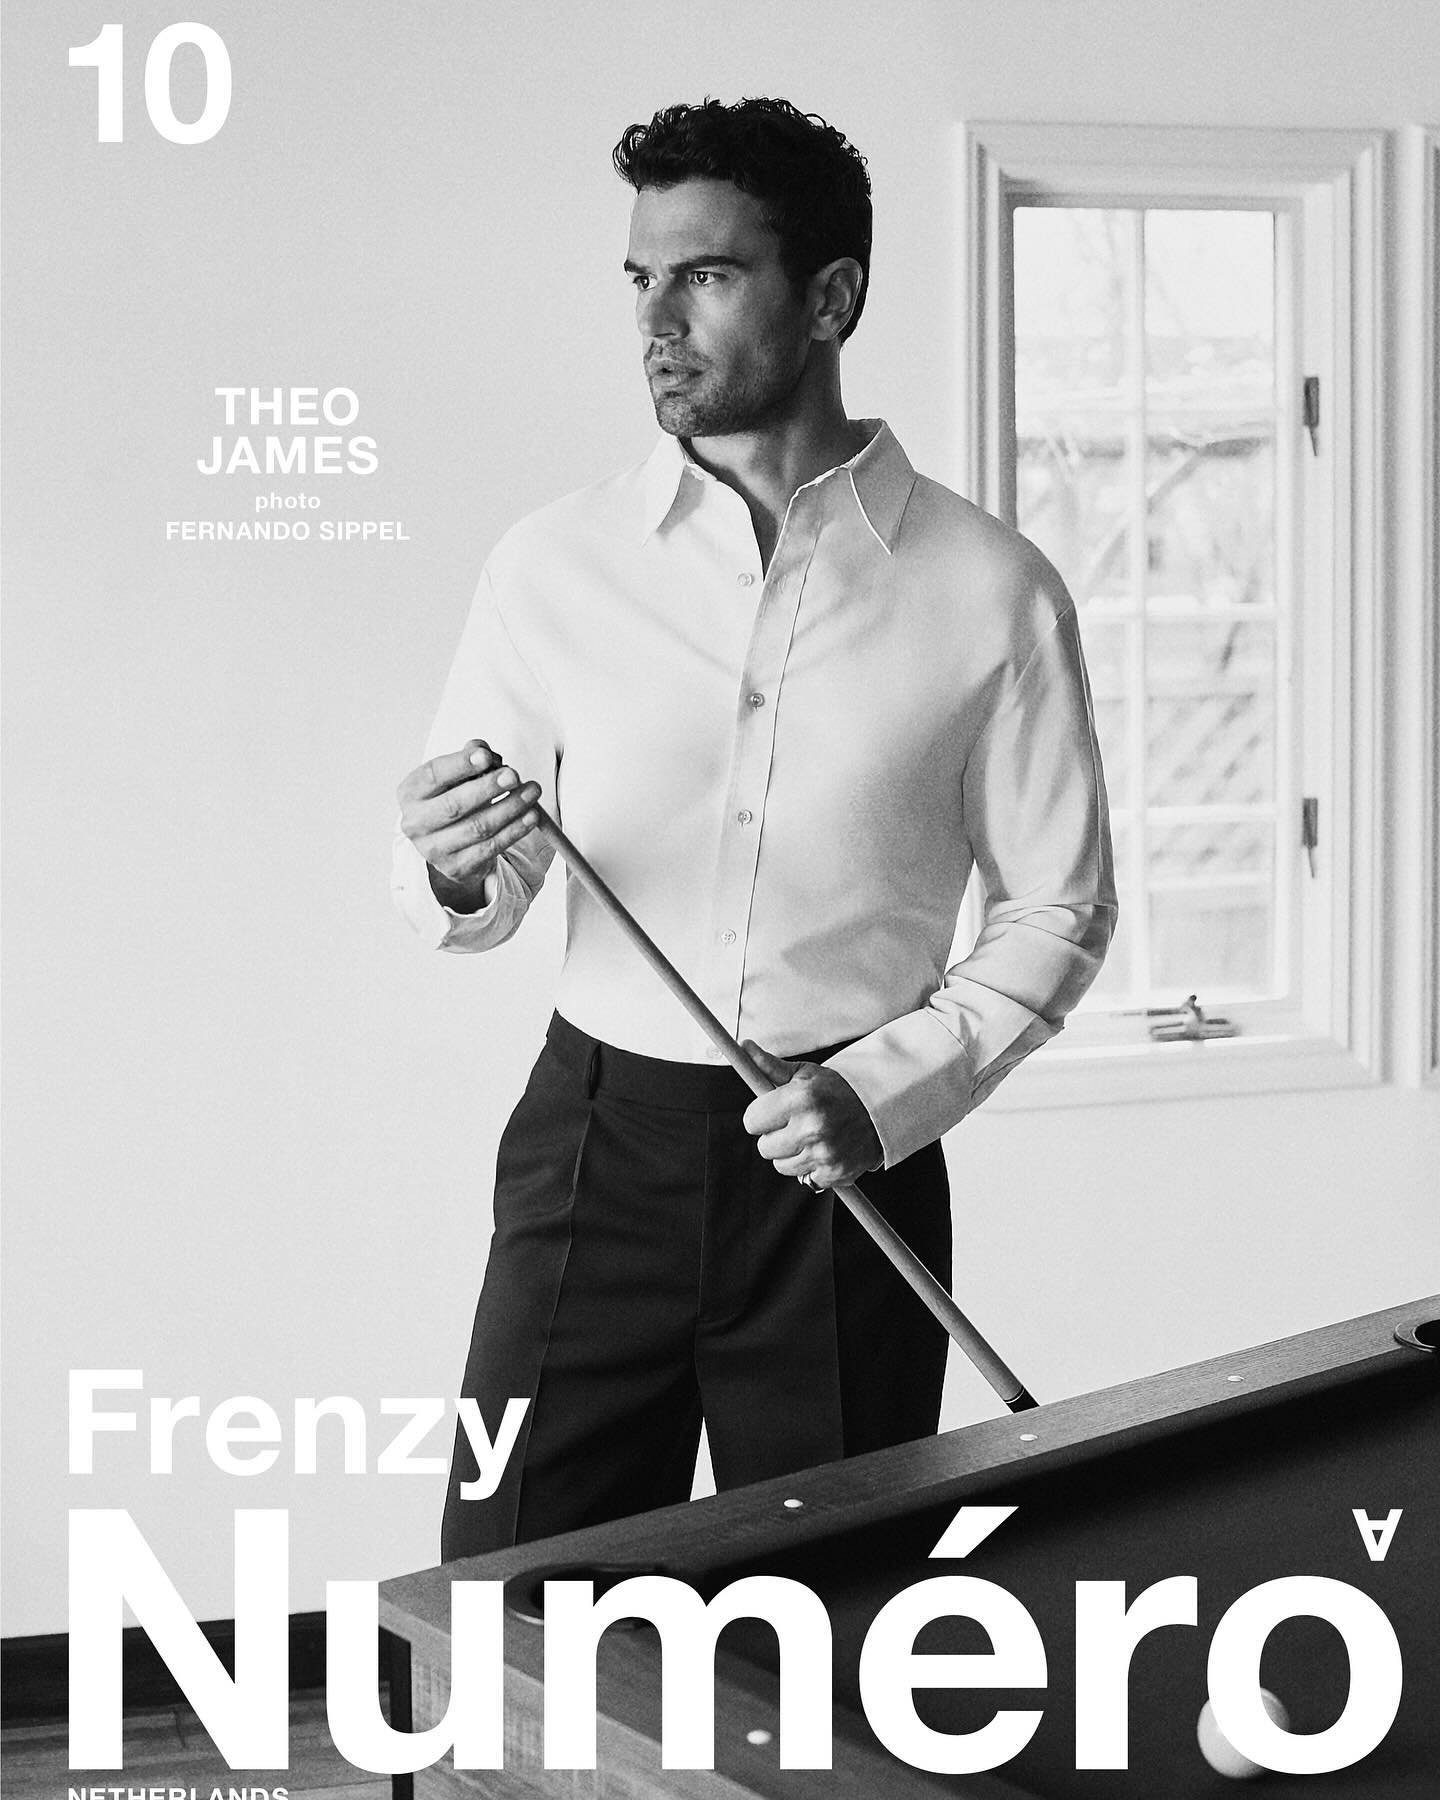 THEO JAMES X NUMERO NL  
The Beyond handsome talent Theo James, gracing the cover of the new issue of Numero Netherlands for Issue #10 , captured by Fernando Sippel. Thank you to such a lovey team in making this all happen. 

talent THEO JAMES
Issue 